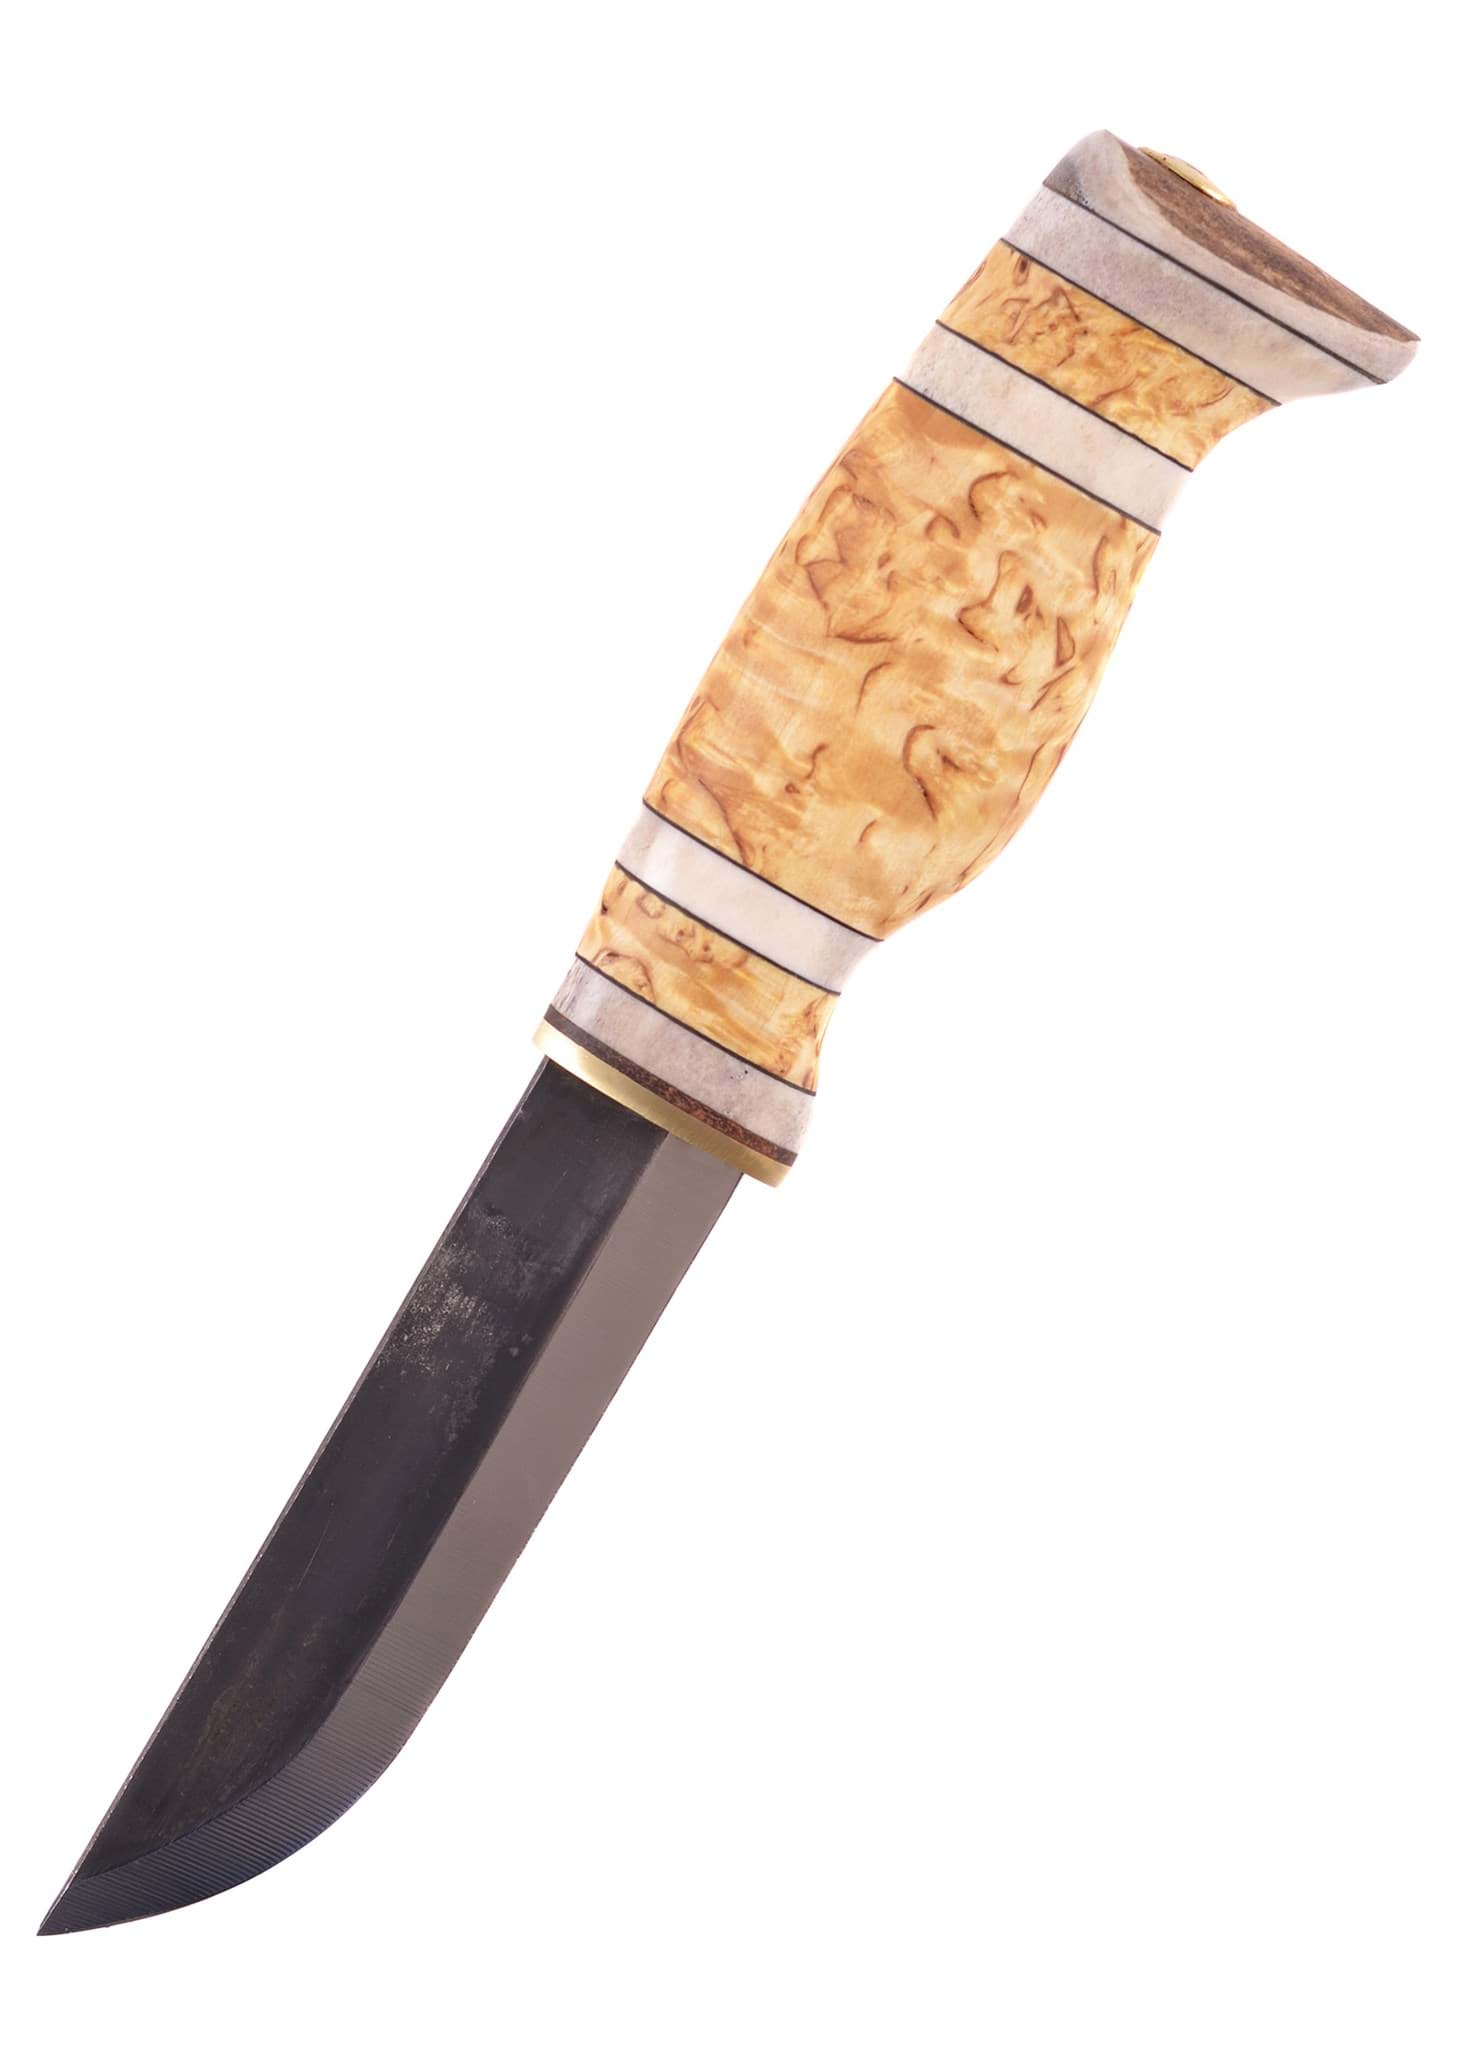 Picture of Wood Jewel - Hunting Knife Curly Birch